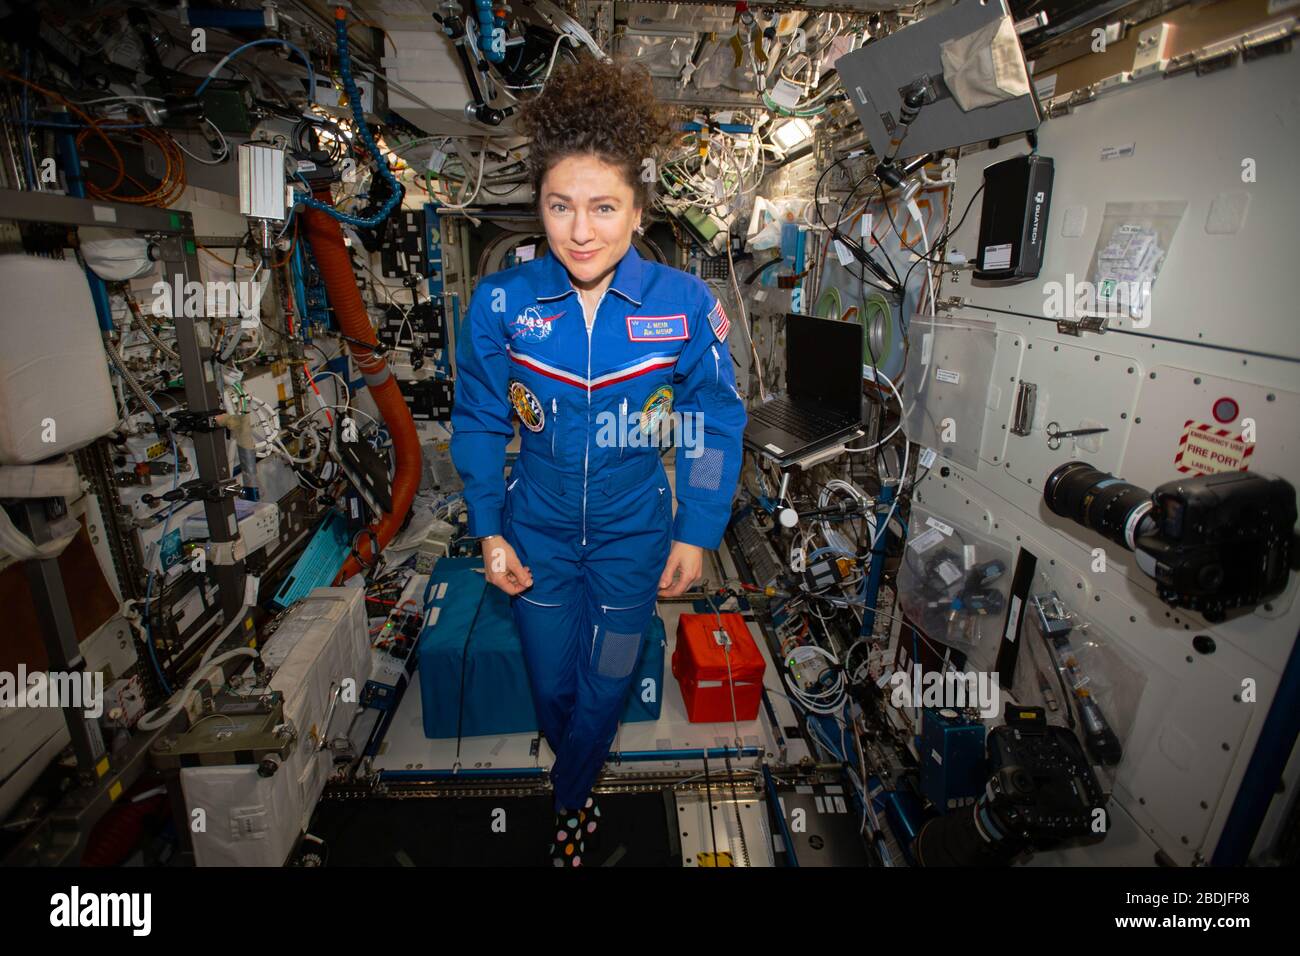 ISS - 29 March 2020 - NASA astronaut and Expedition 62 Flight Engineer Jessica Meir poses for a portrait in the weightless environment of the Internat Stock Photo